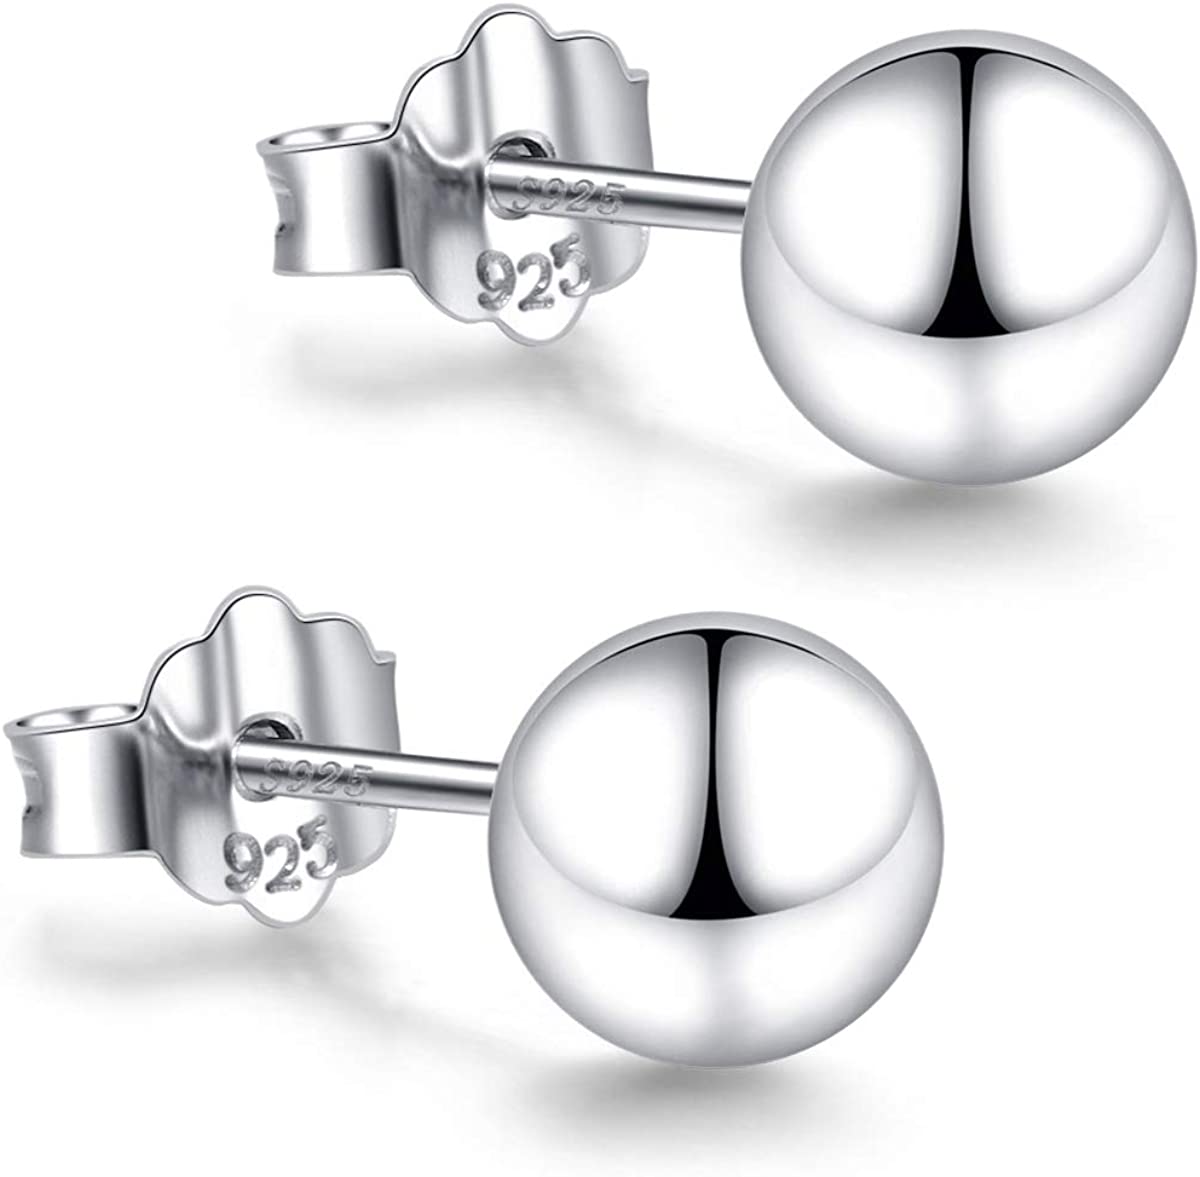 White Gold Sterling Silver Ball Stud Earrings 3mm-10mm Options, Simple Polished Ball Studs Hypoallergenic Jewelry